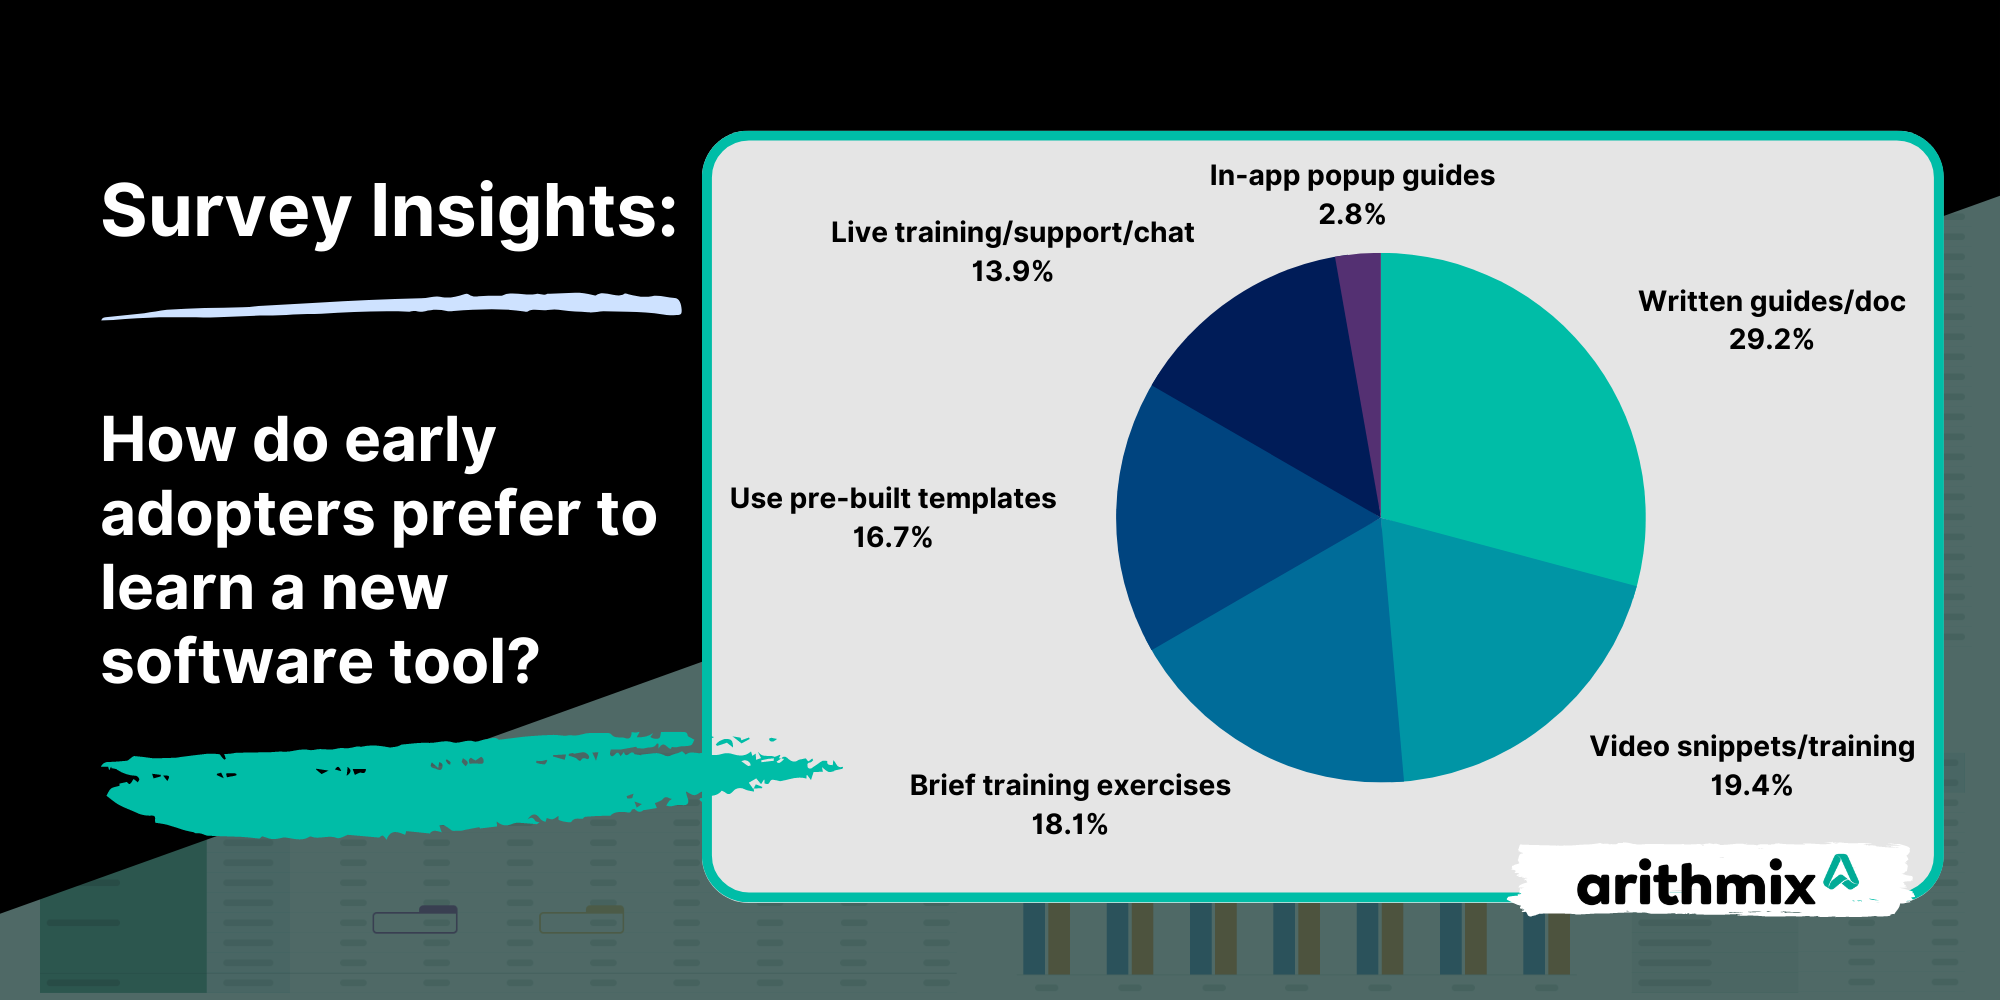 Survey insights: How do early adopters prefer to learn a new software tool? Survey results: Written guides and documentation 29%, Video snippets and training 19.4%, Brief training exercises 18.1%, Use pre-built templates 16.7% Live training support and chat 13.9%, In-app popup guides 2.8%